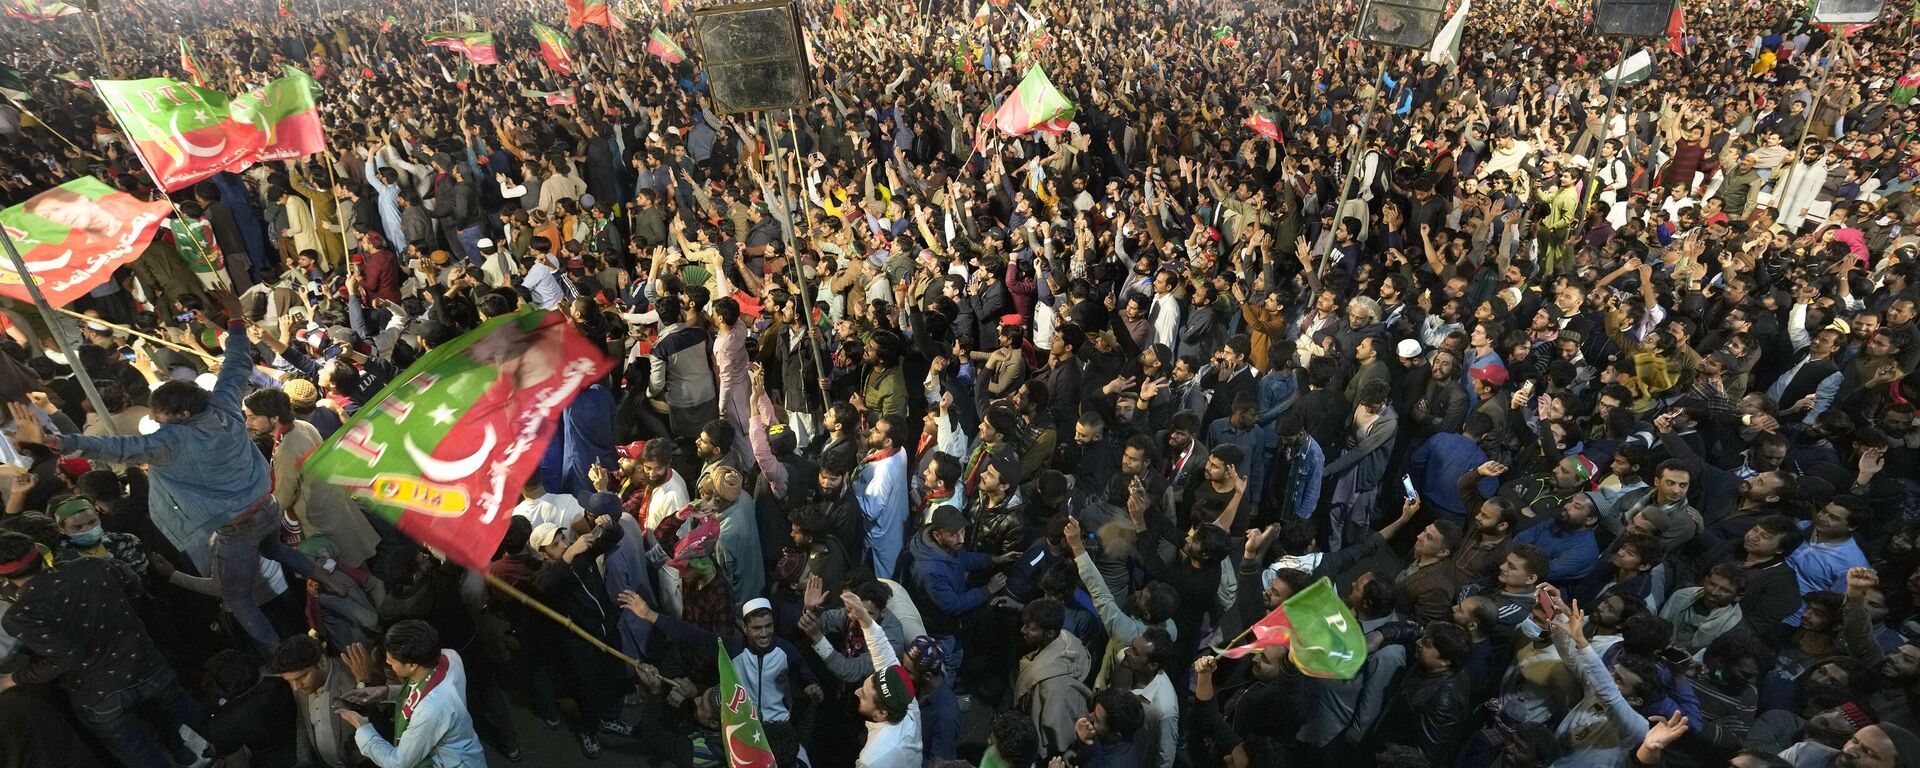 Supporters of former Prime Minister Imran Khan listen to his speech during a rally in Lahore, Pakistan, Sunday, March 26, 2023, to pressure the government of Shahbaz Sharif to agree to hold snap elections. - Sputnik India, 1920, 27.03.2023